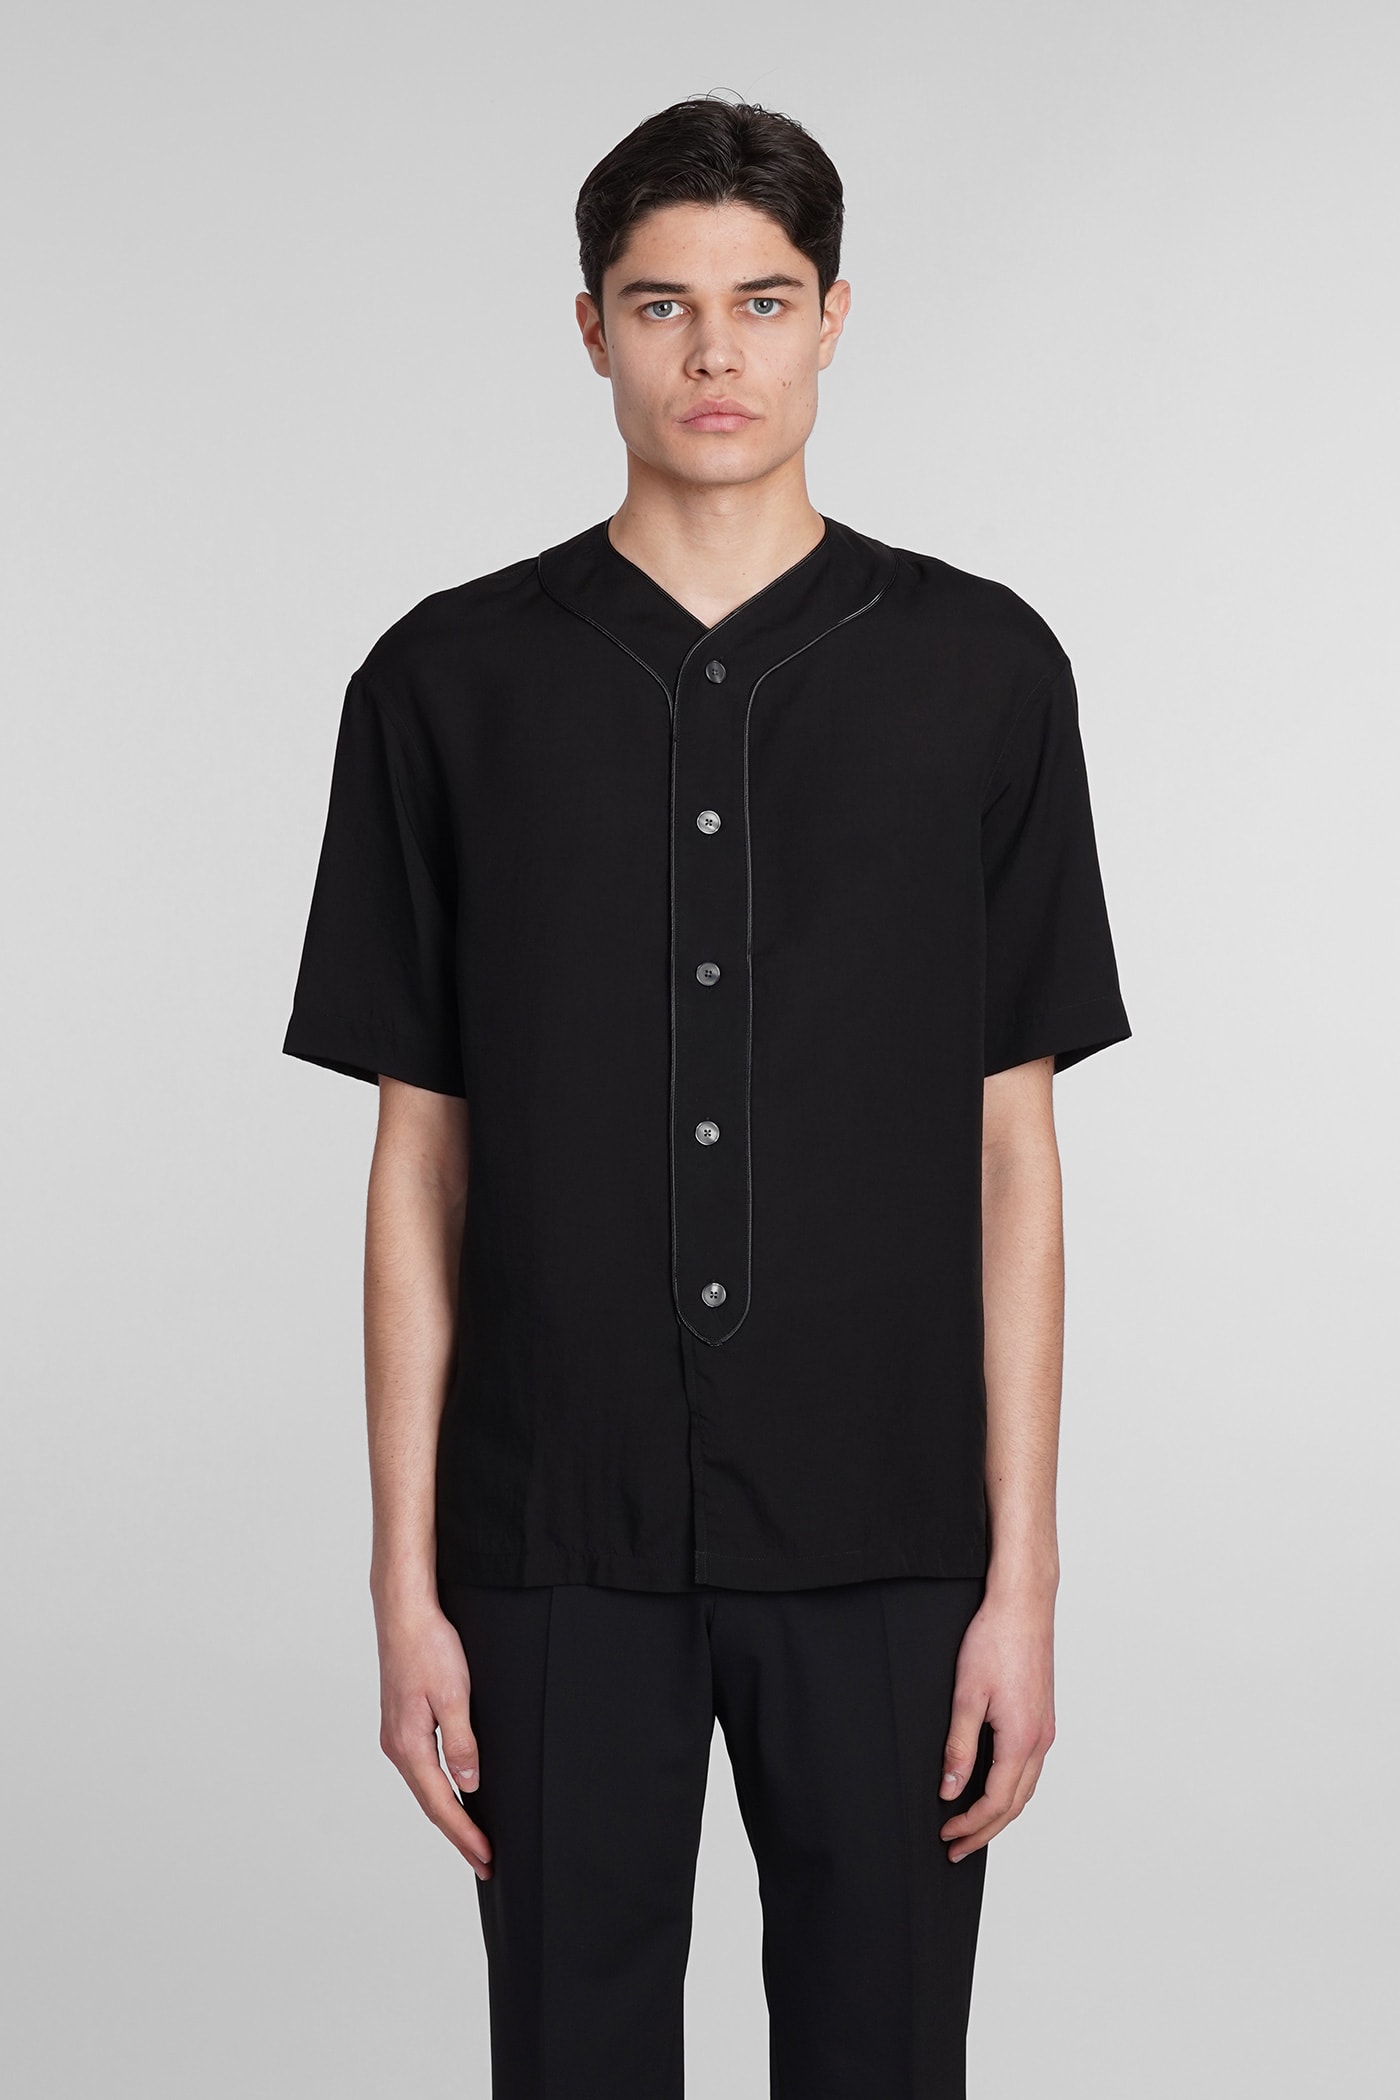 Emporio Armani Shirt In Black Wool And Polyester